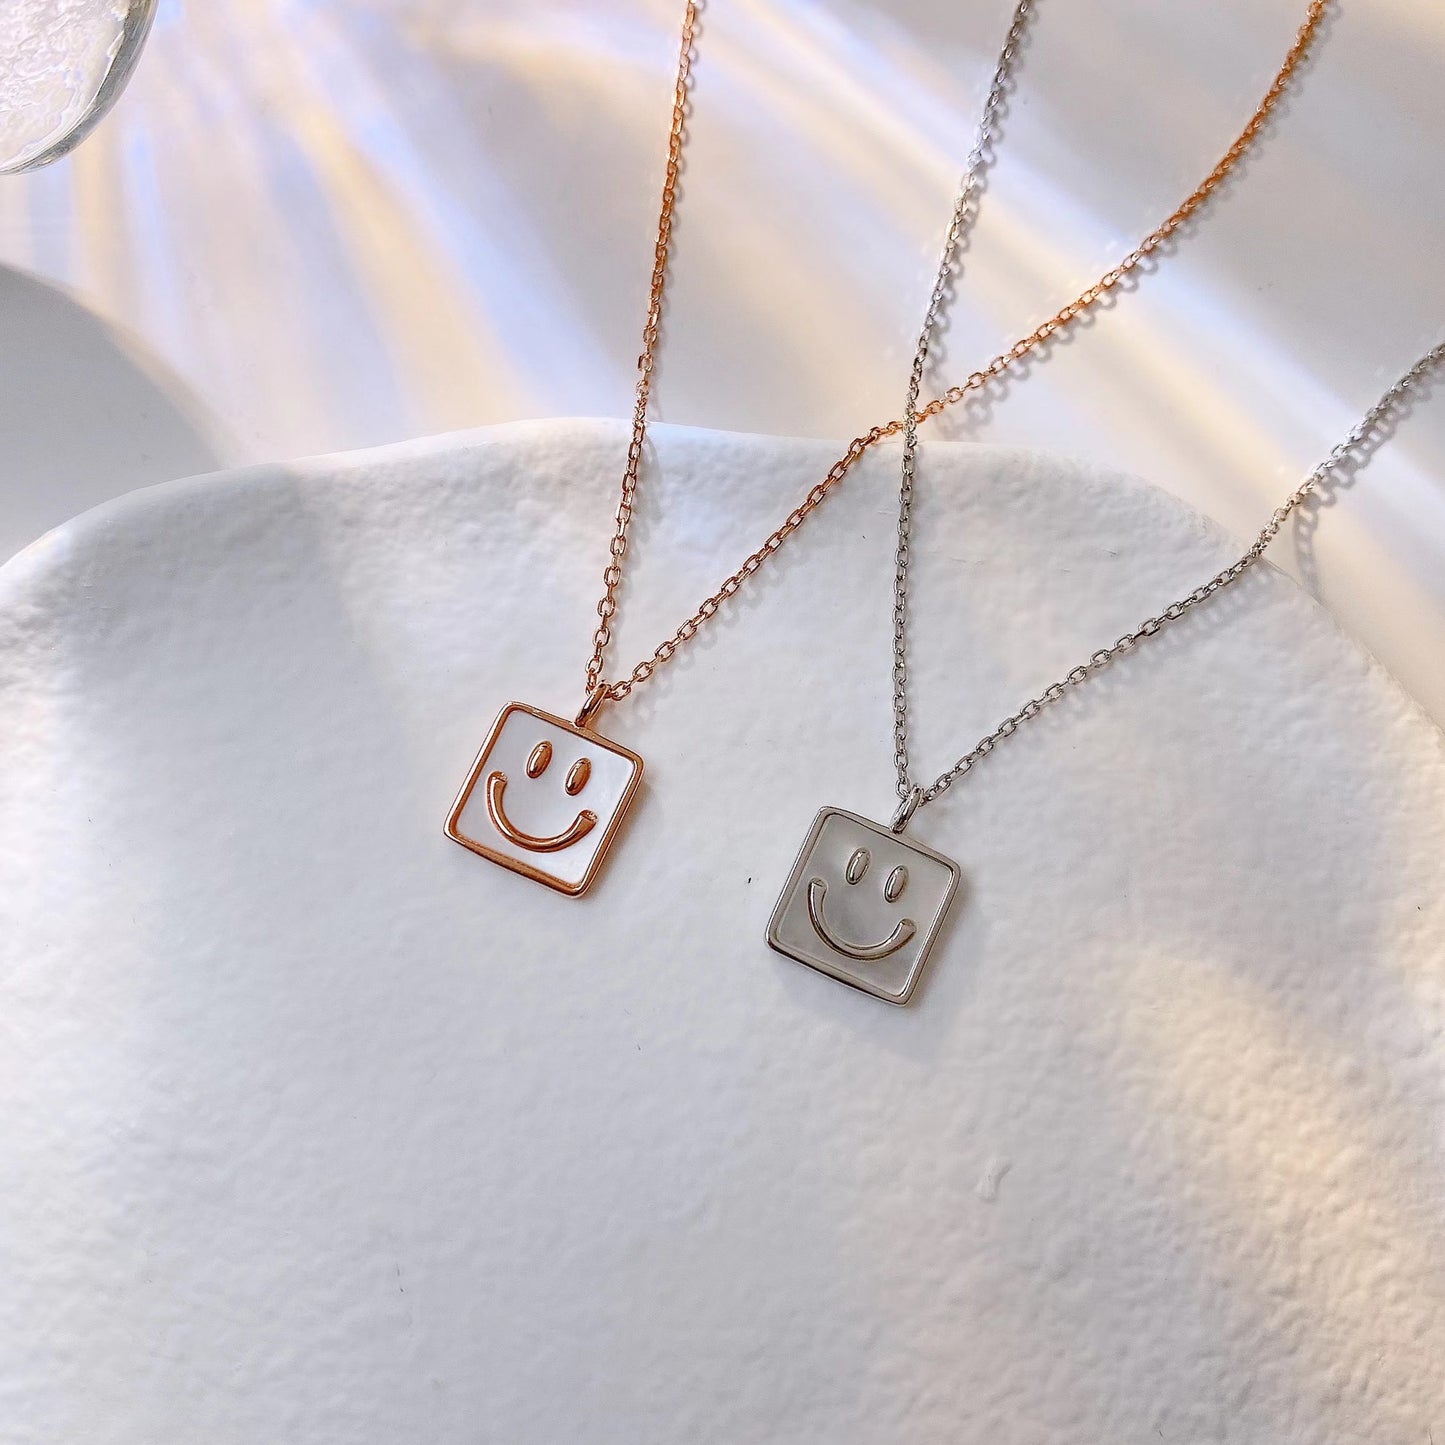 Smiley Face Square Pendant Silver Necklace for Women